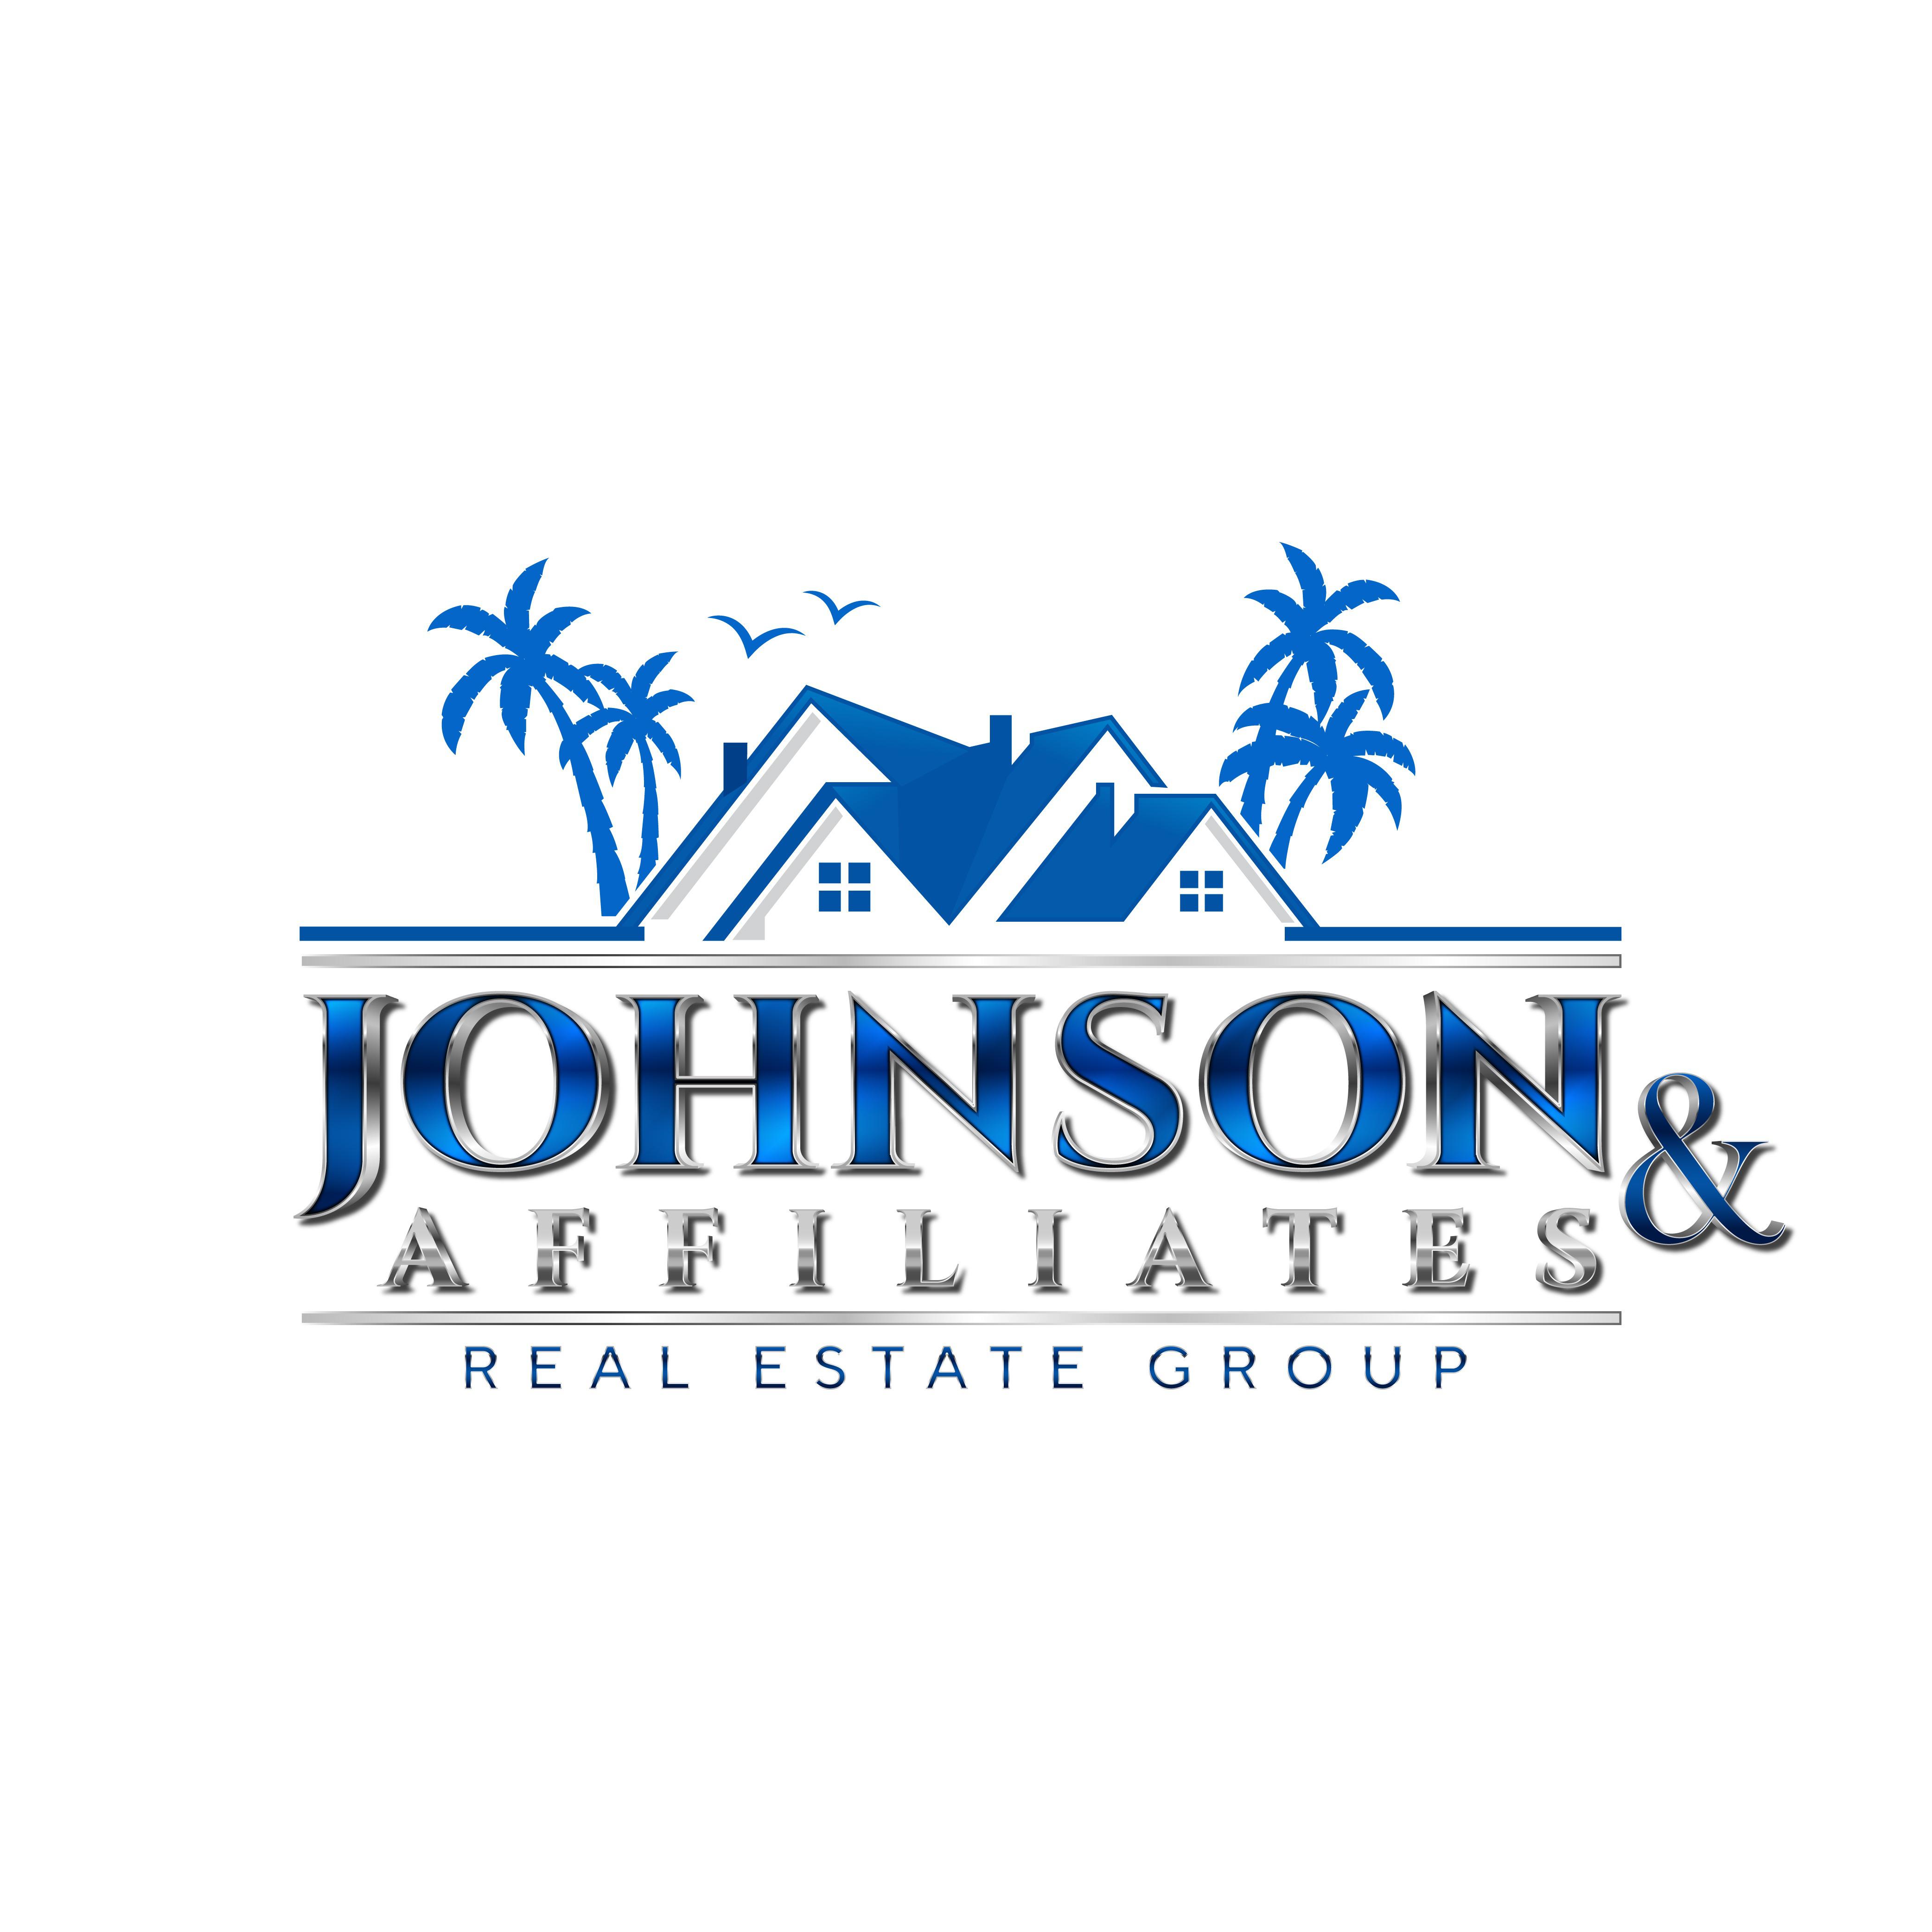 Get your real estate journey started with us! Johnson & Affiliates Real Estate Group Richmond Hill (706)662-7636